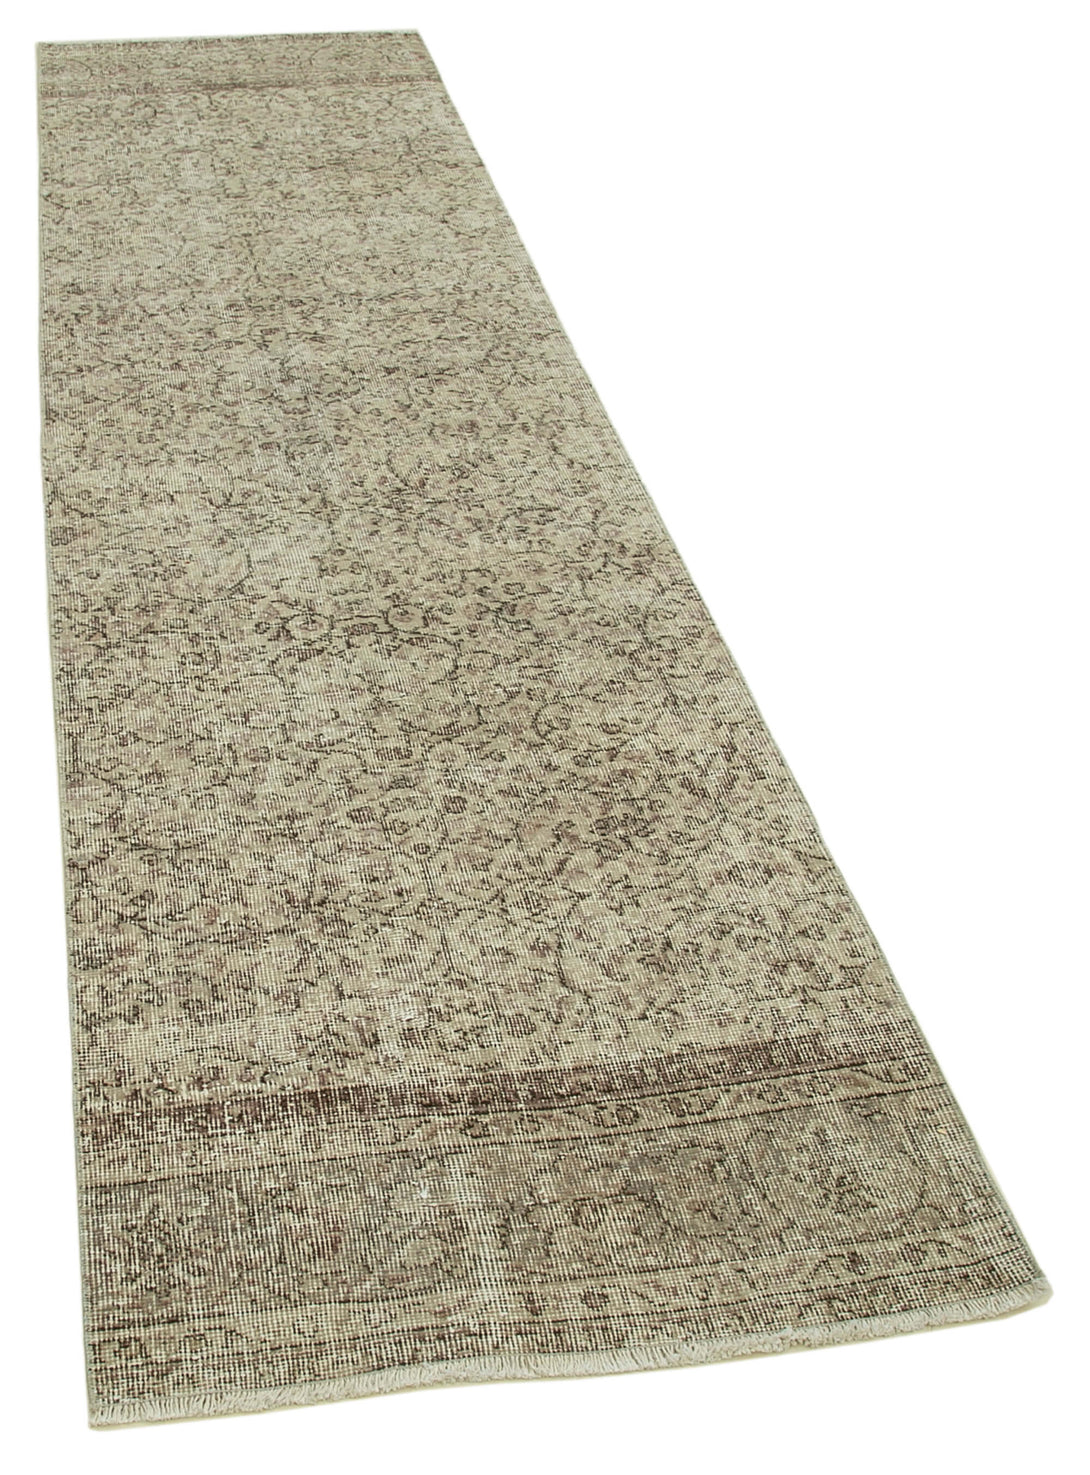 Handmade Overdyed Runner > Design# OL-AC-37204 > Size: 2'-8" x 9'-10", Carpet Culture Rugs, Handmade Rugs, NYC Rugs, New Rugs, Shop Rugs, Rug Store, Outlet Rugs, SoHo Rugs, Rugs in USA